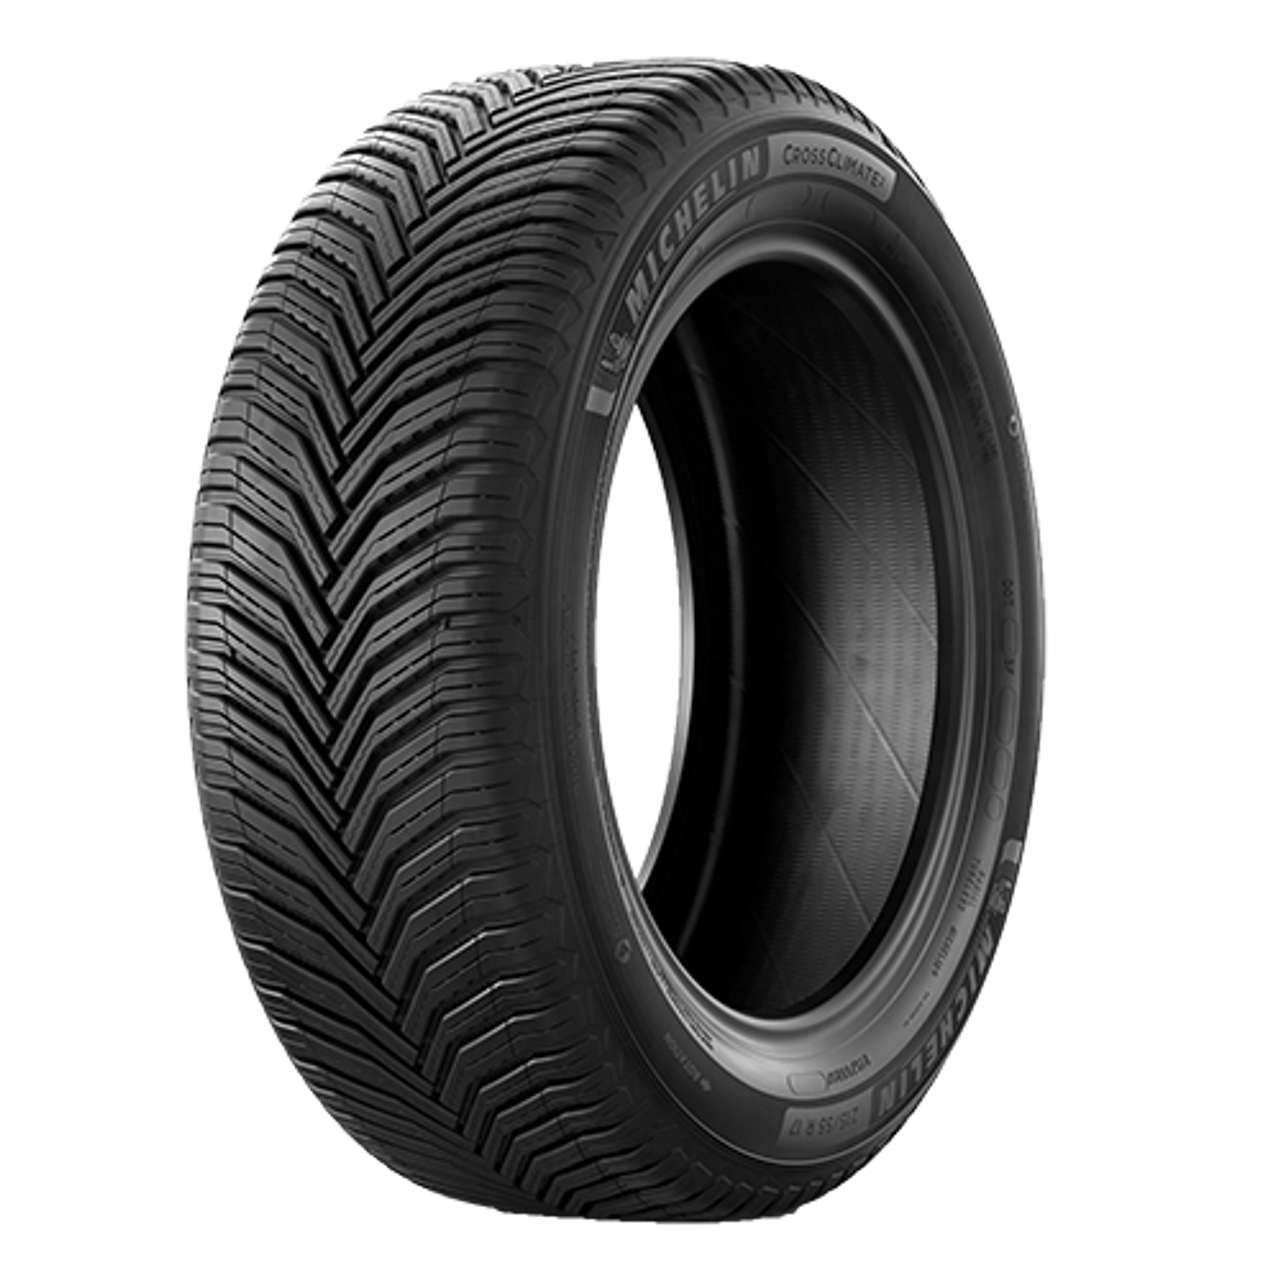 MICHELIN CROSSCLIMATE 2 215/60R17 100H BSW